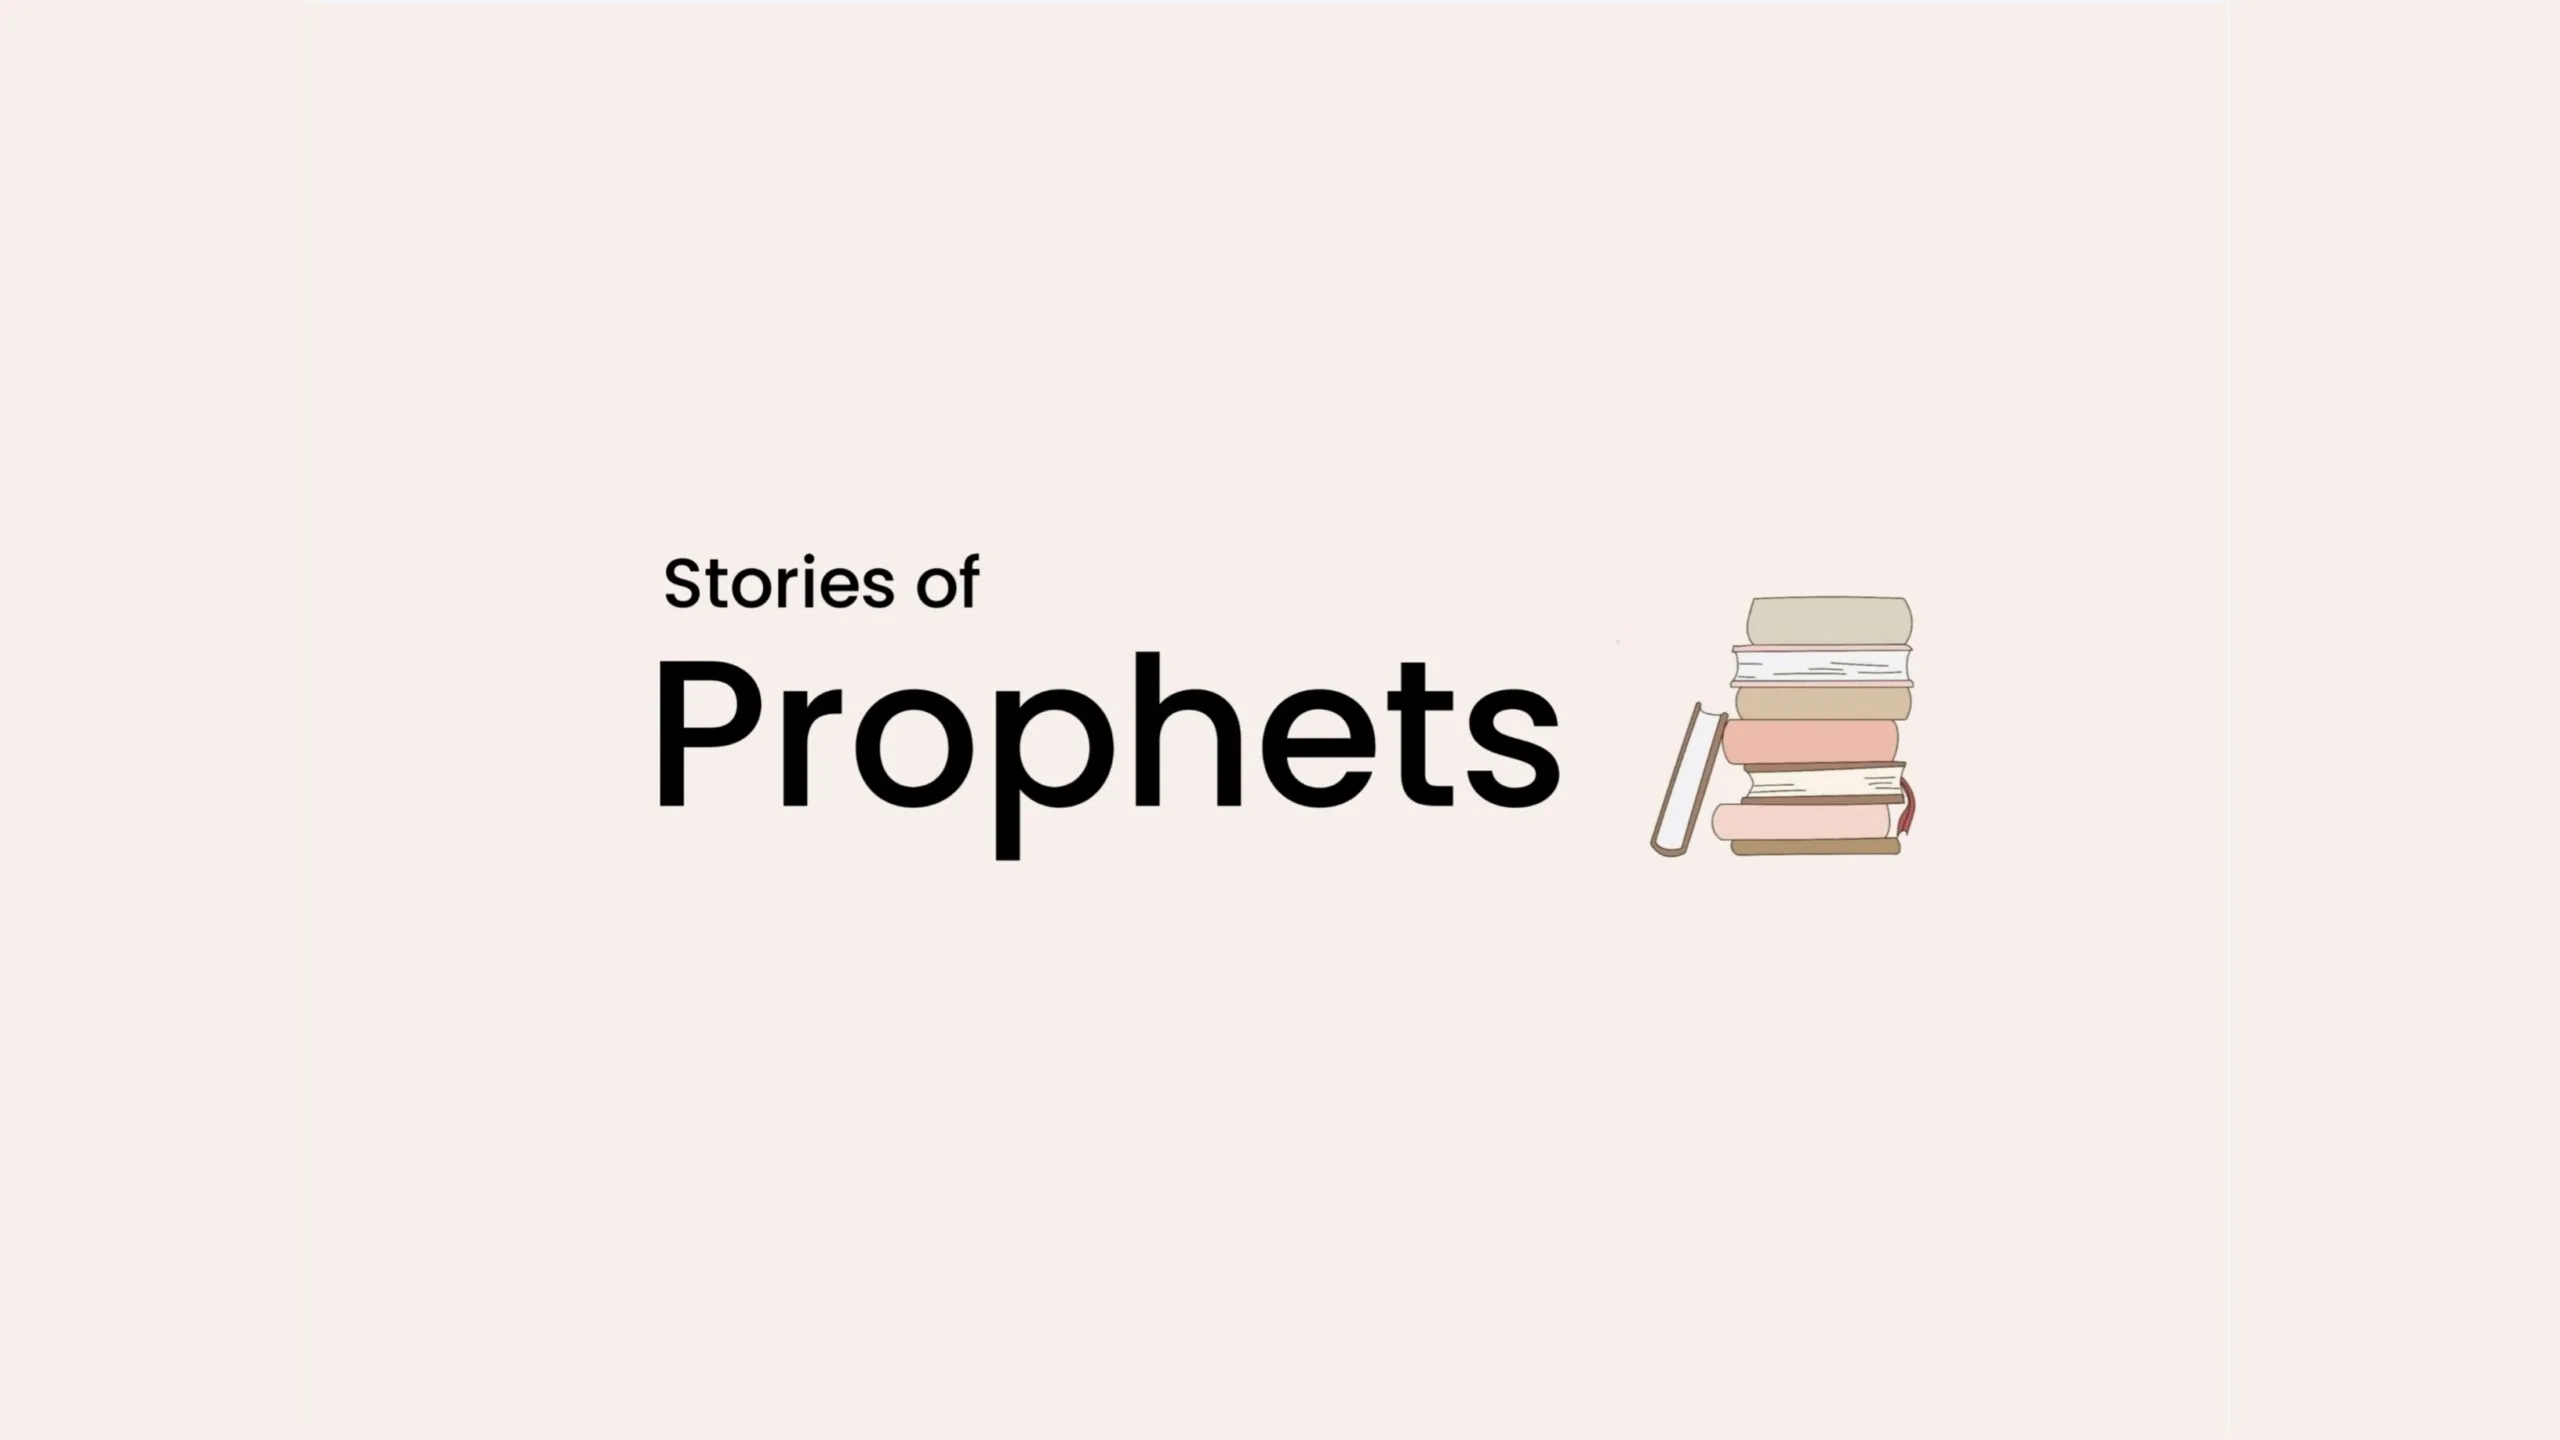 Stories of Prophets and Messengers